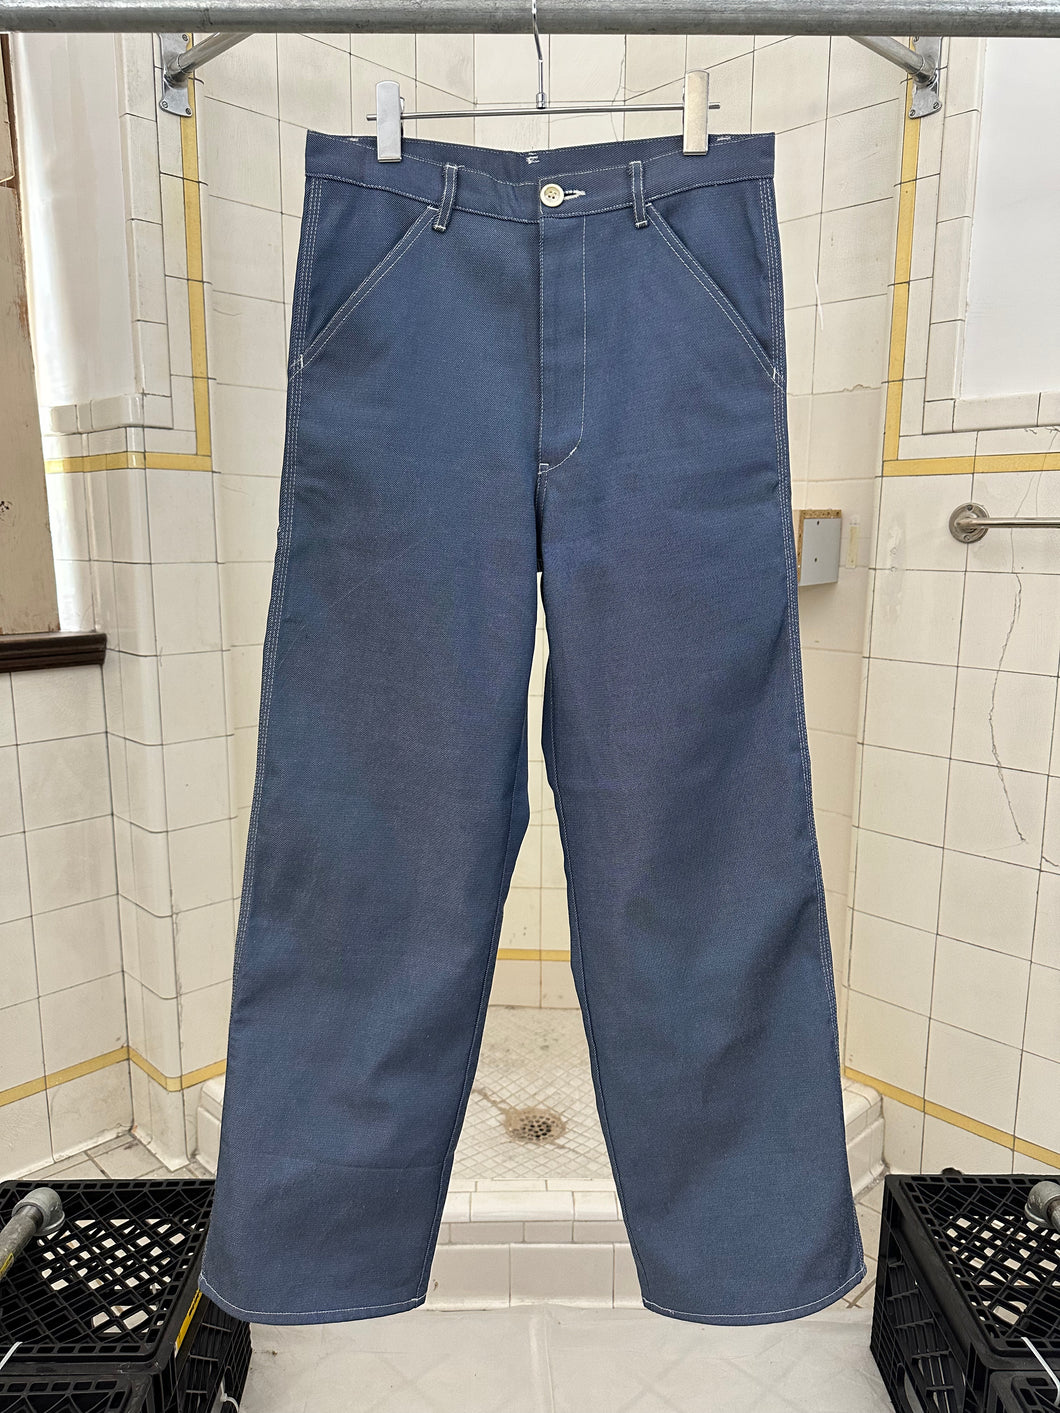 2000s CDGH+ Poly Cotton Twill Workpants - Size M